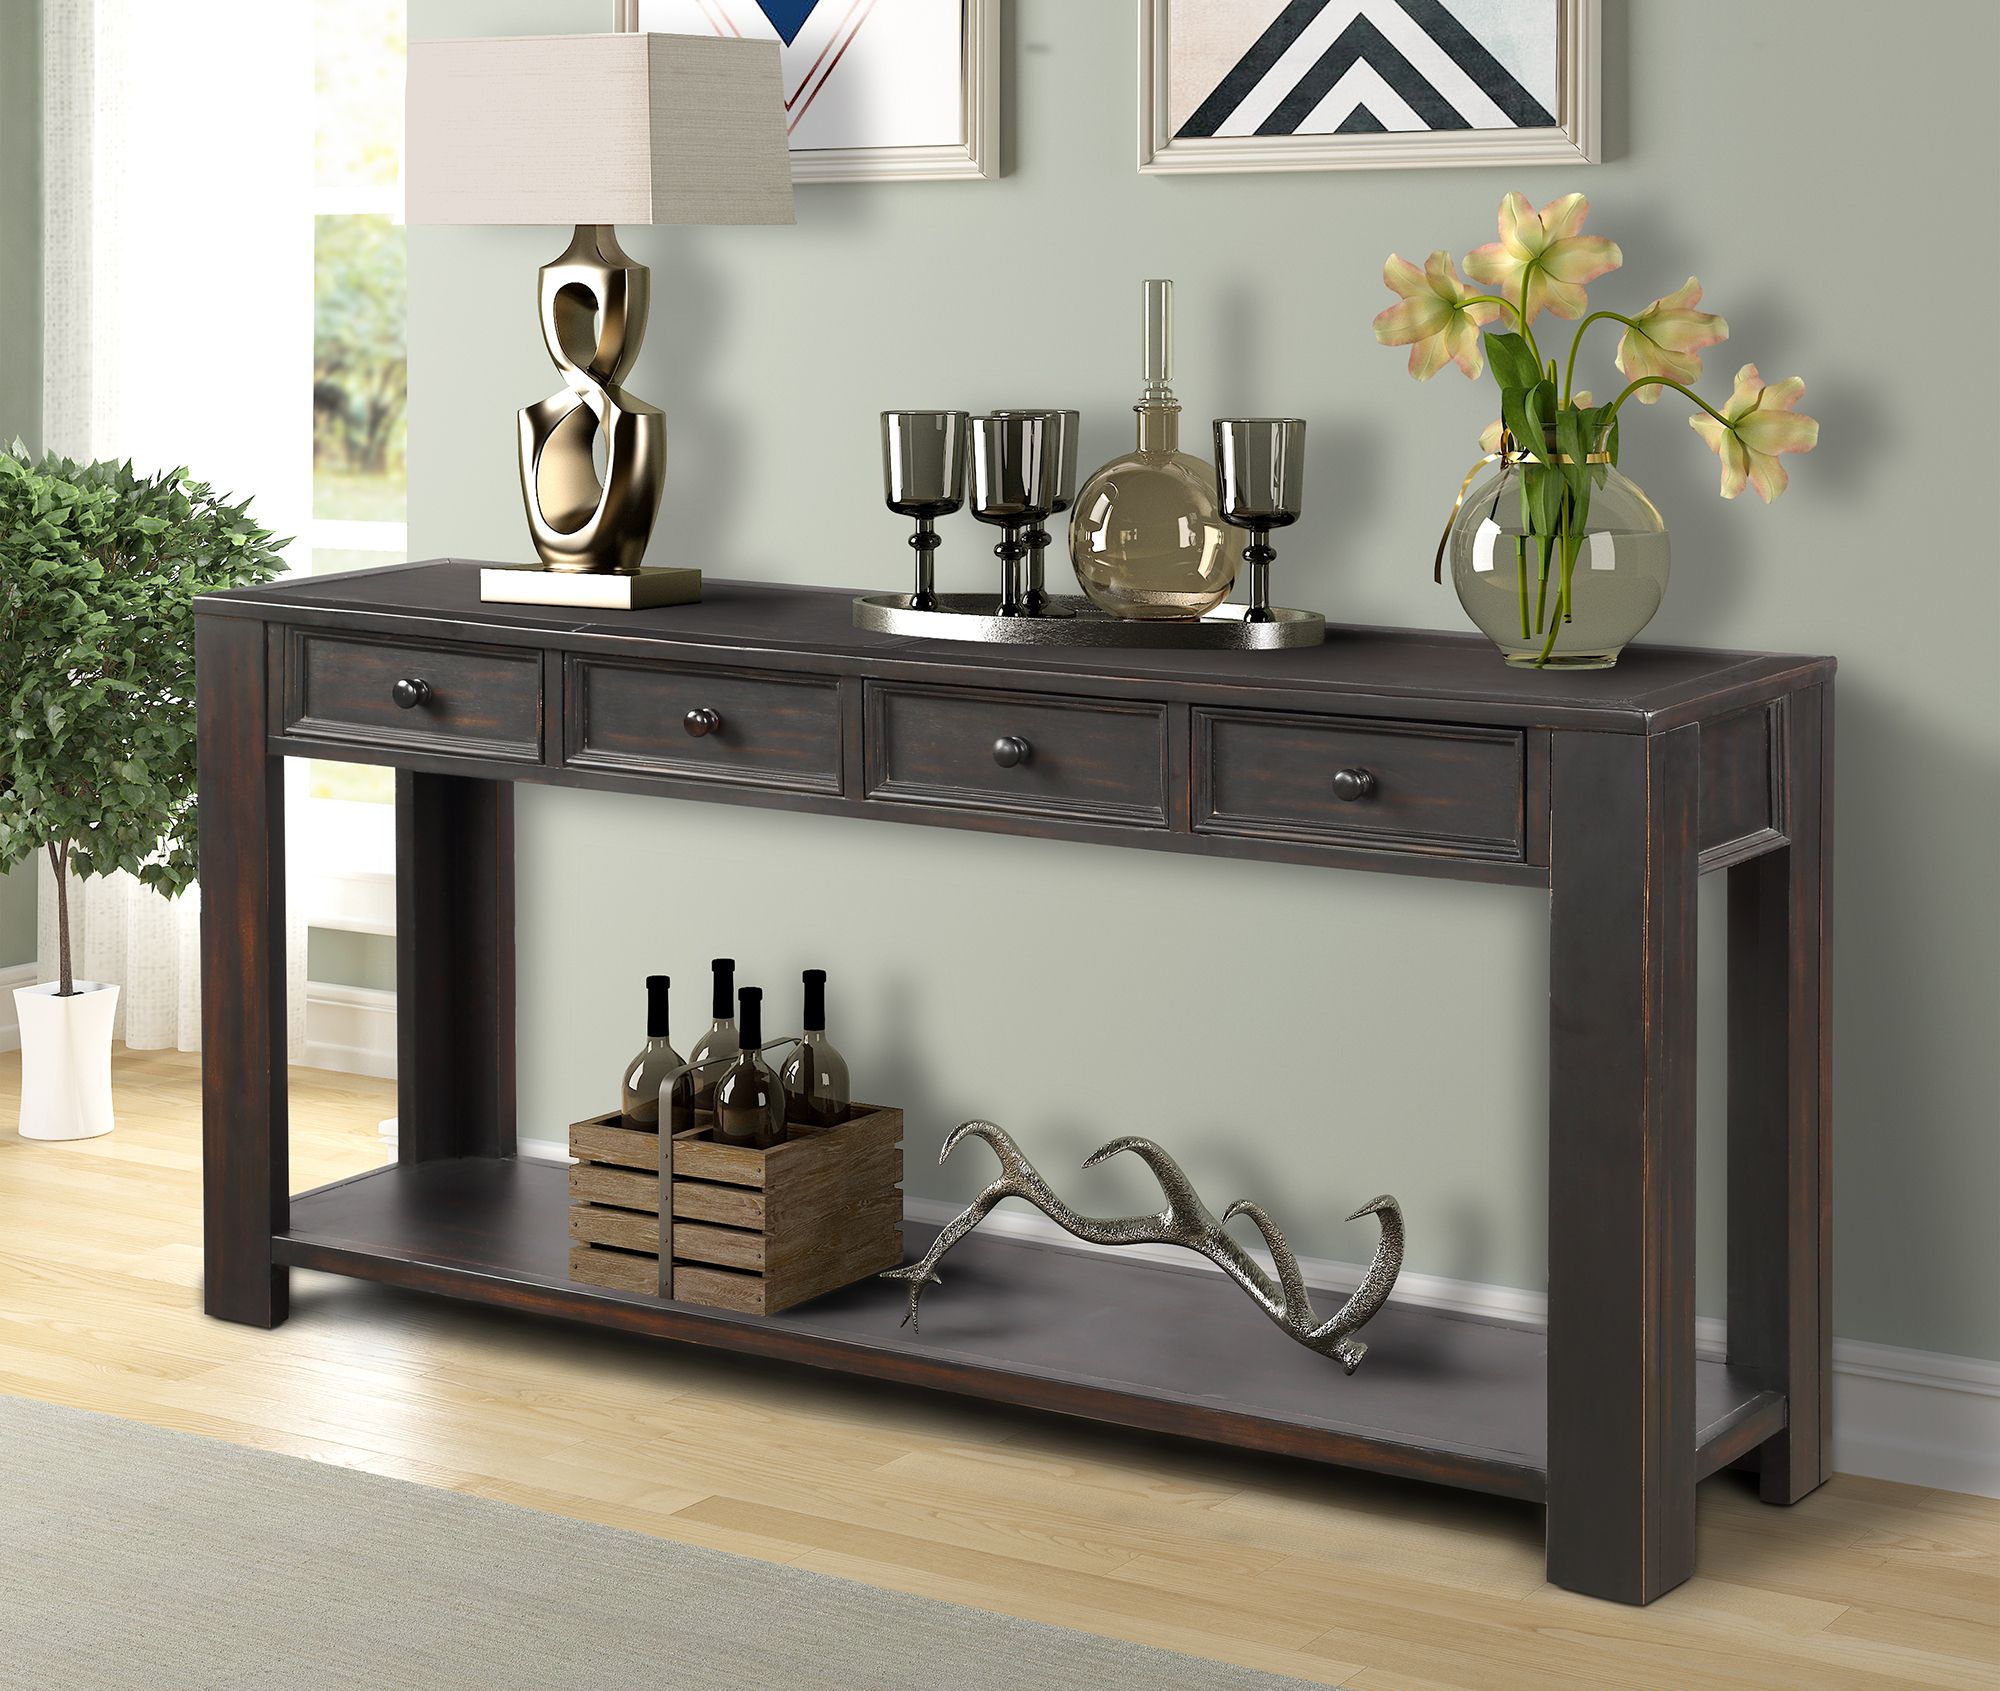 2020 Modern Farmhouse Console Tables With Regard To Entryway Table With 4 Storage Drawers, 64"×15"×30" Wood (View 3 of 10)